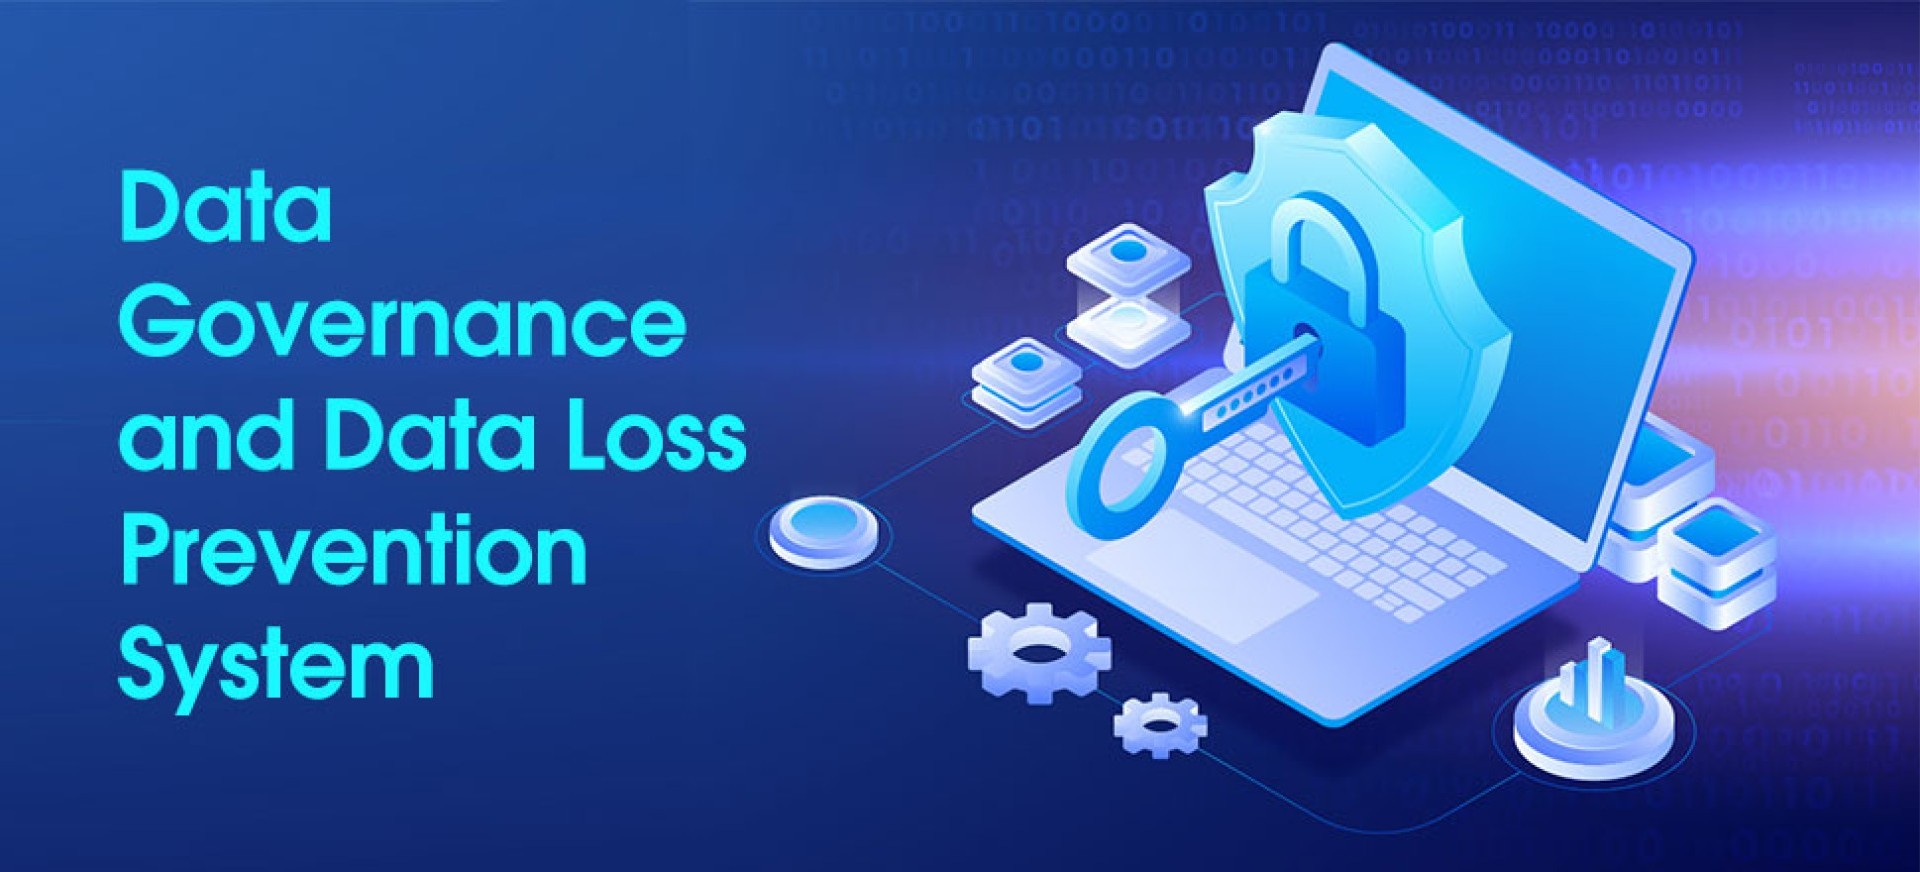 Data Governance and Data Loss Prevention System